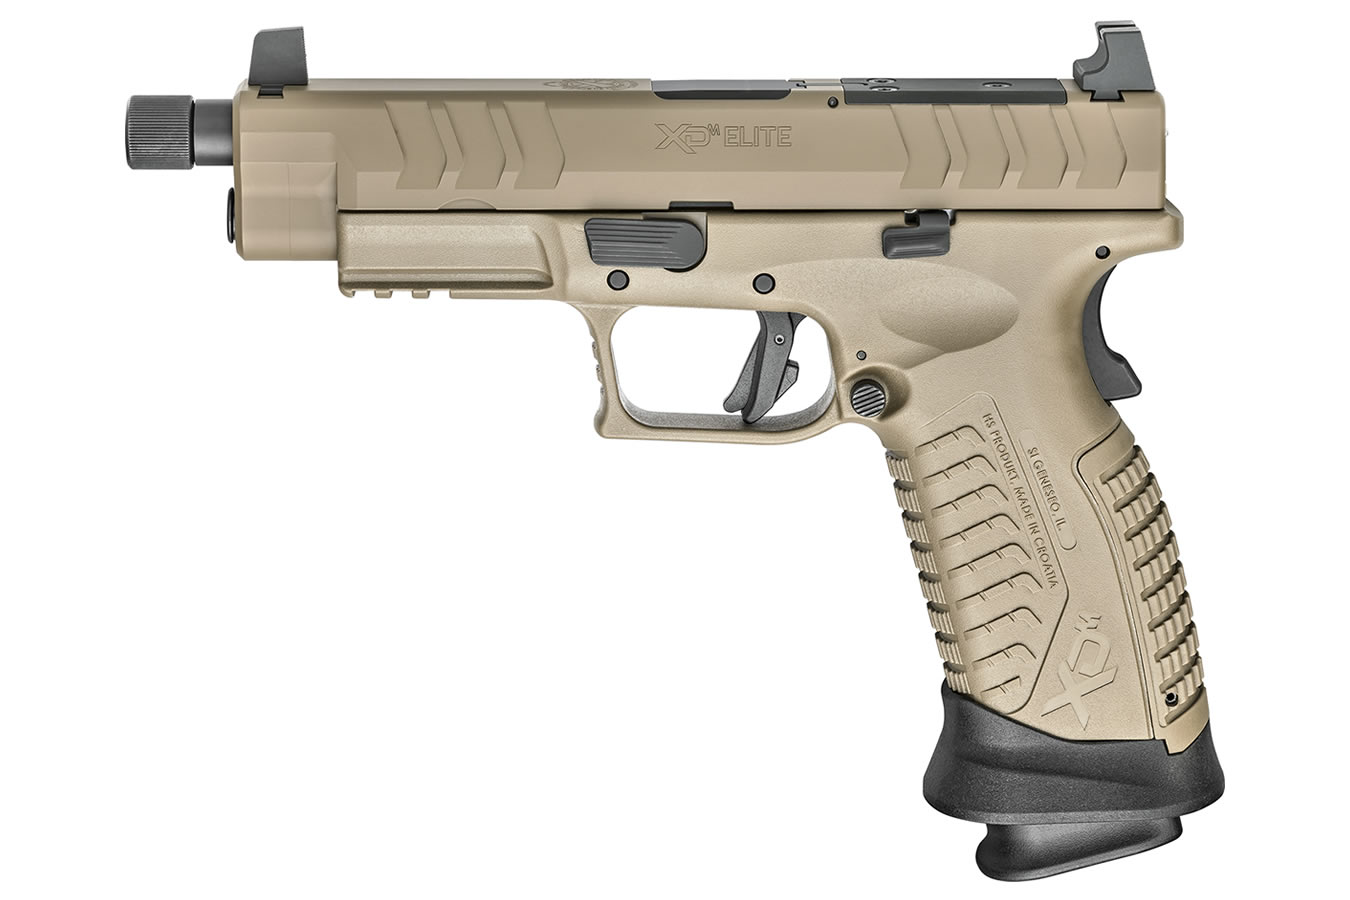 SPRINGFIELD XD-M ELITE TACTICAL OSP 9MM 4.5 INCH BBL PISTOL WITH FDE FINISH